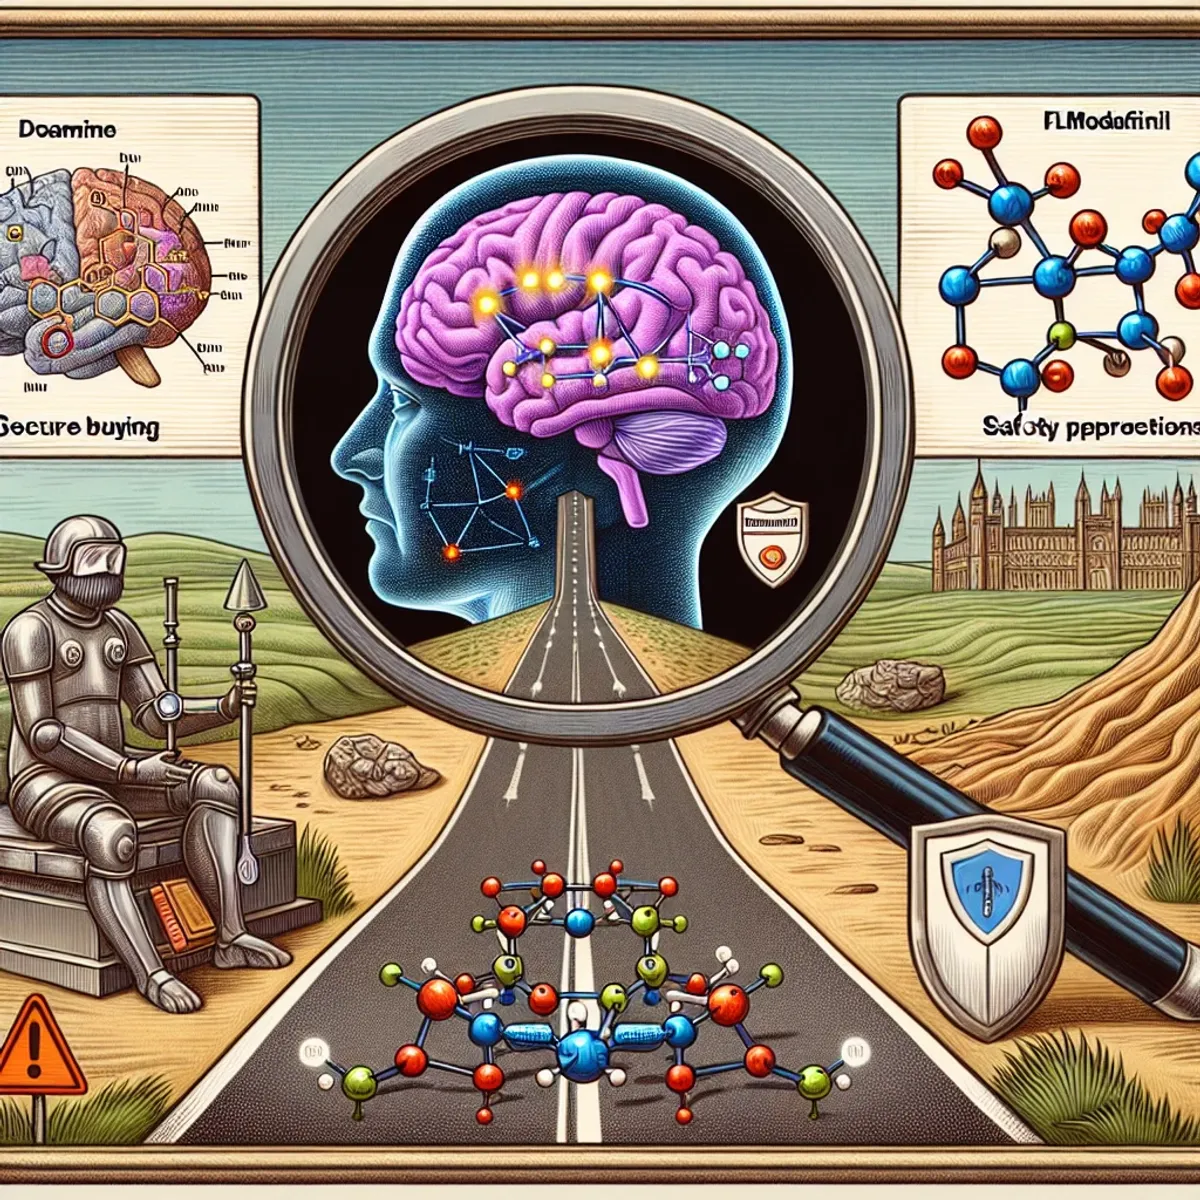 An intricate digital illustration depicts a magnified brain with illuminated dopamine pathways, leading to an online market sphere, scientific molecules representing Flmodafinil and Modafinil, a safety shield indicating precautions, and a futuristic landscape symbolizing potential applications and ongoing research.